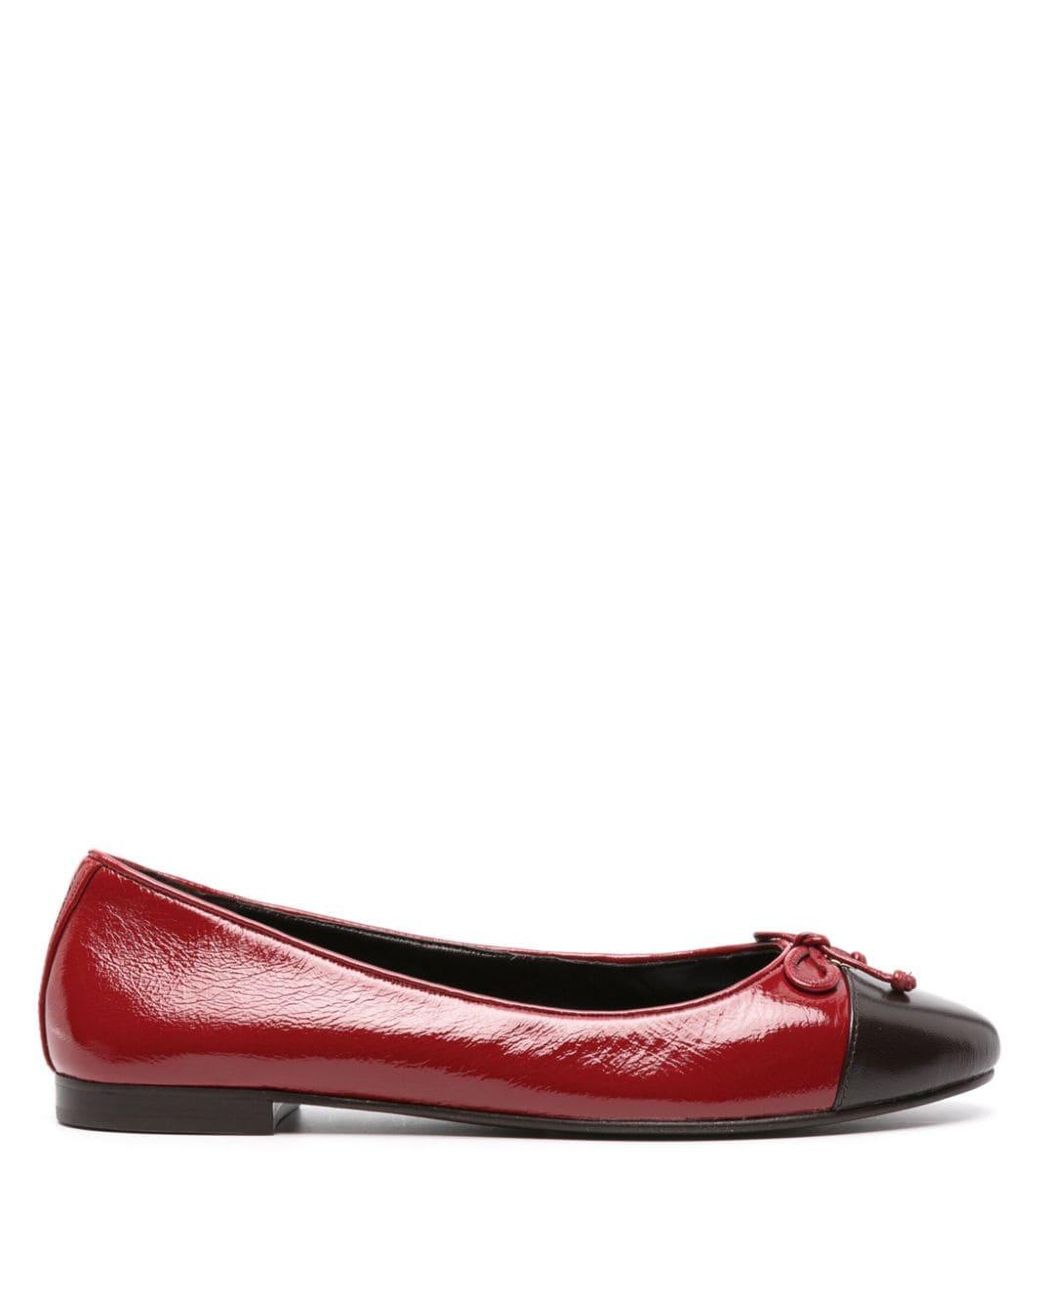 Tory Burch Cap-toe Leather Ballerina Shoes in Red | Lyst